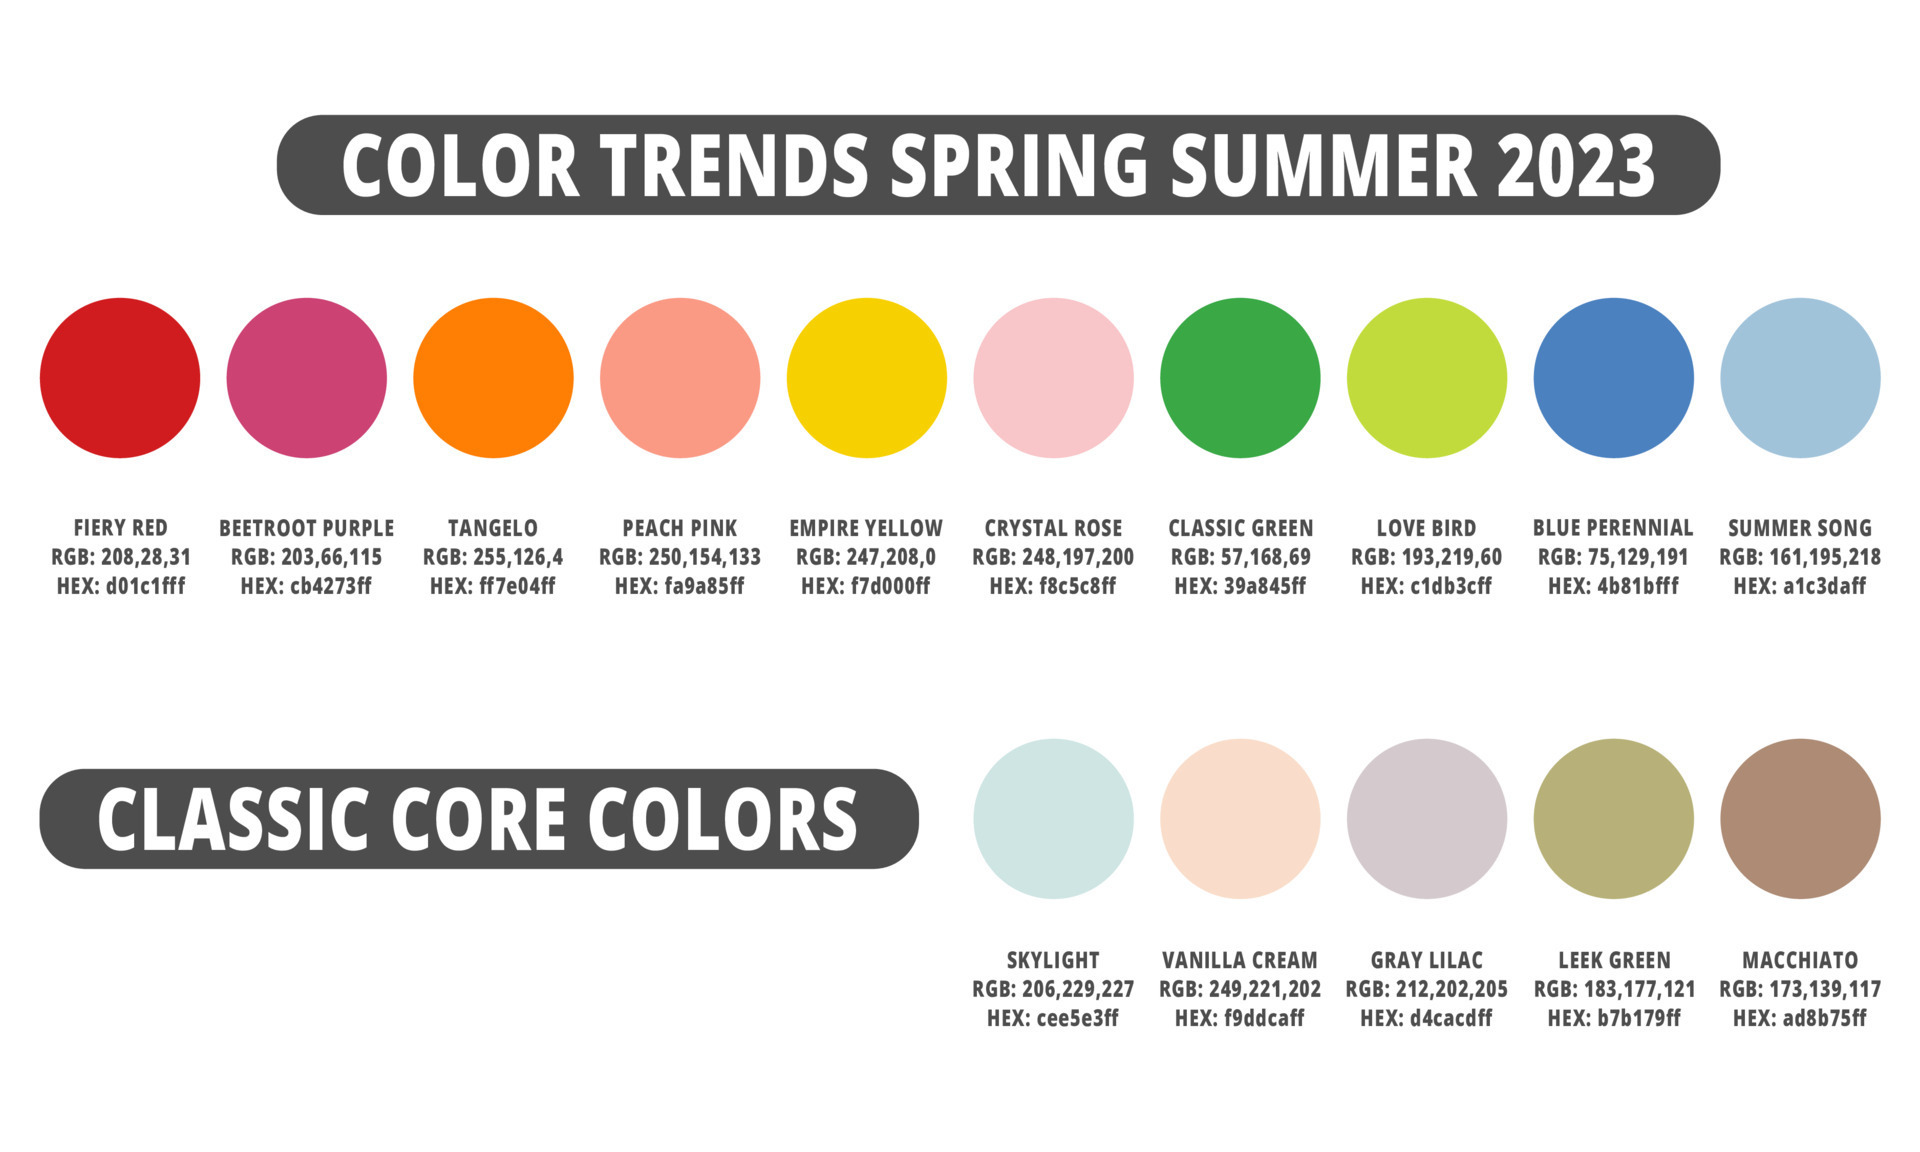 Fashion color trends spring summer 2023. Fashion color guide with named